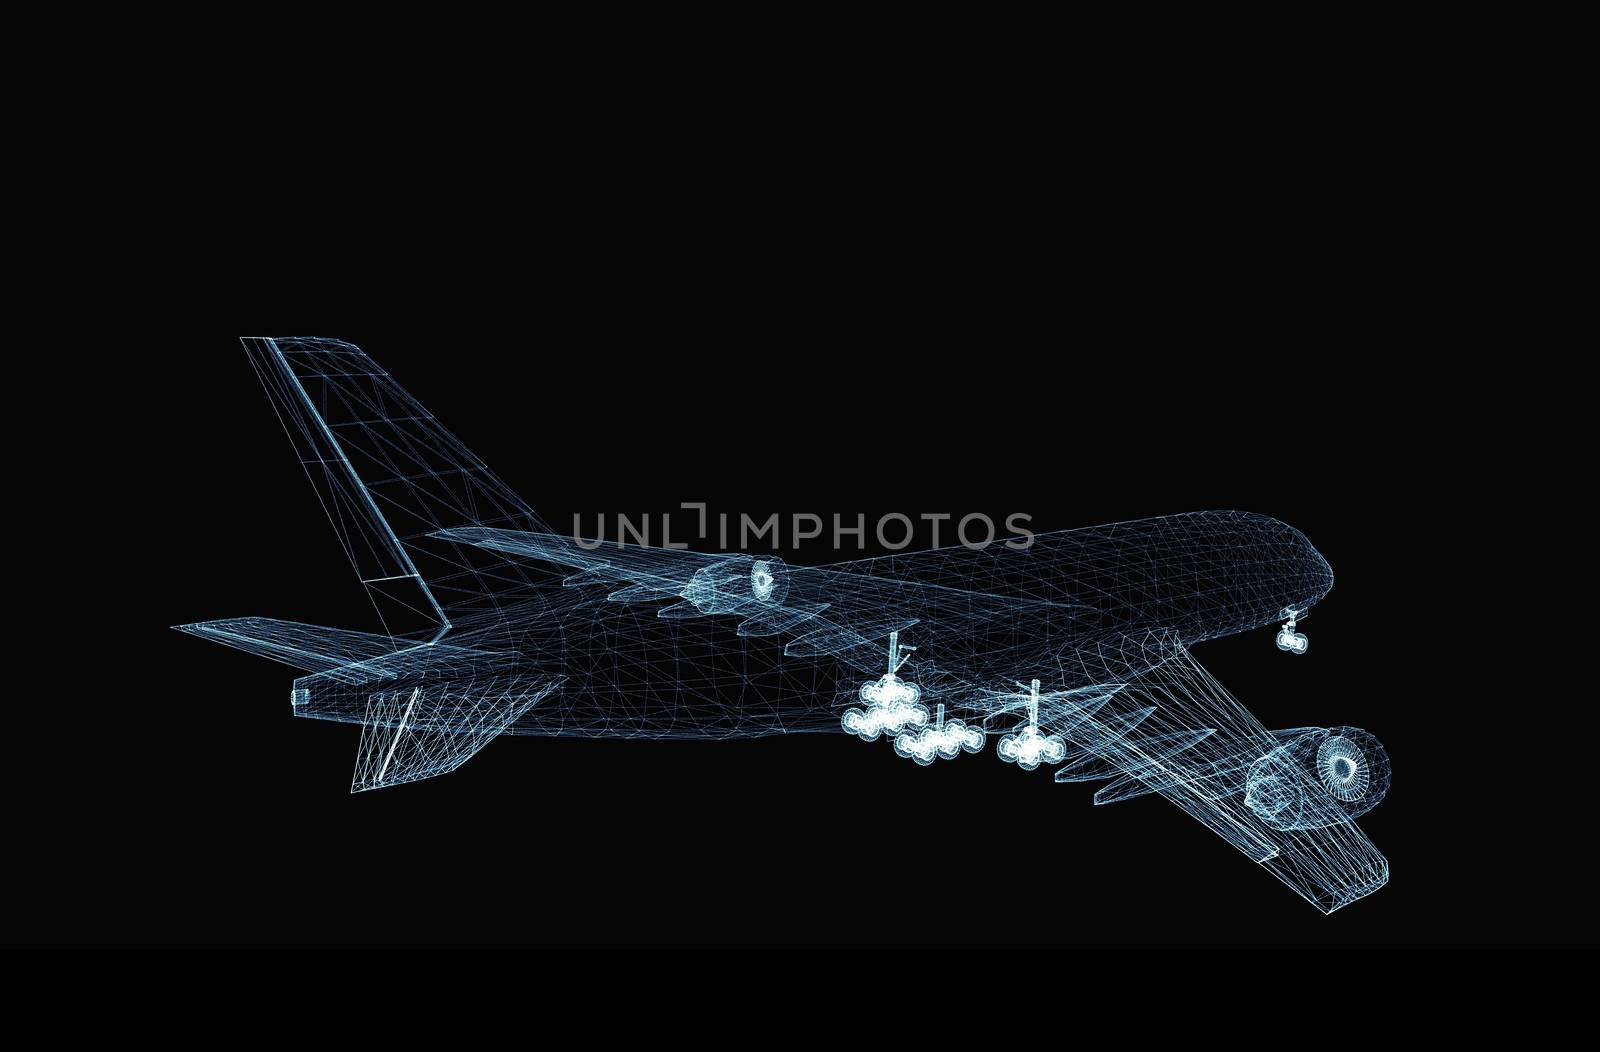 Abstract digital airplane by cherezoff